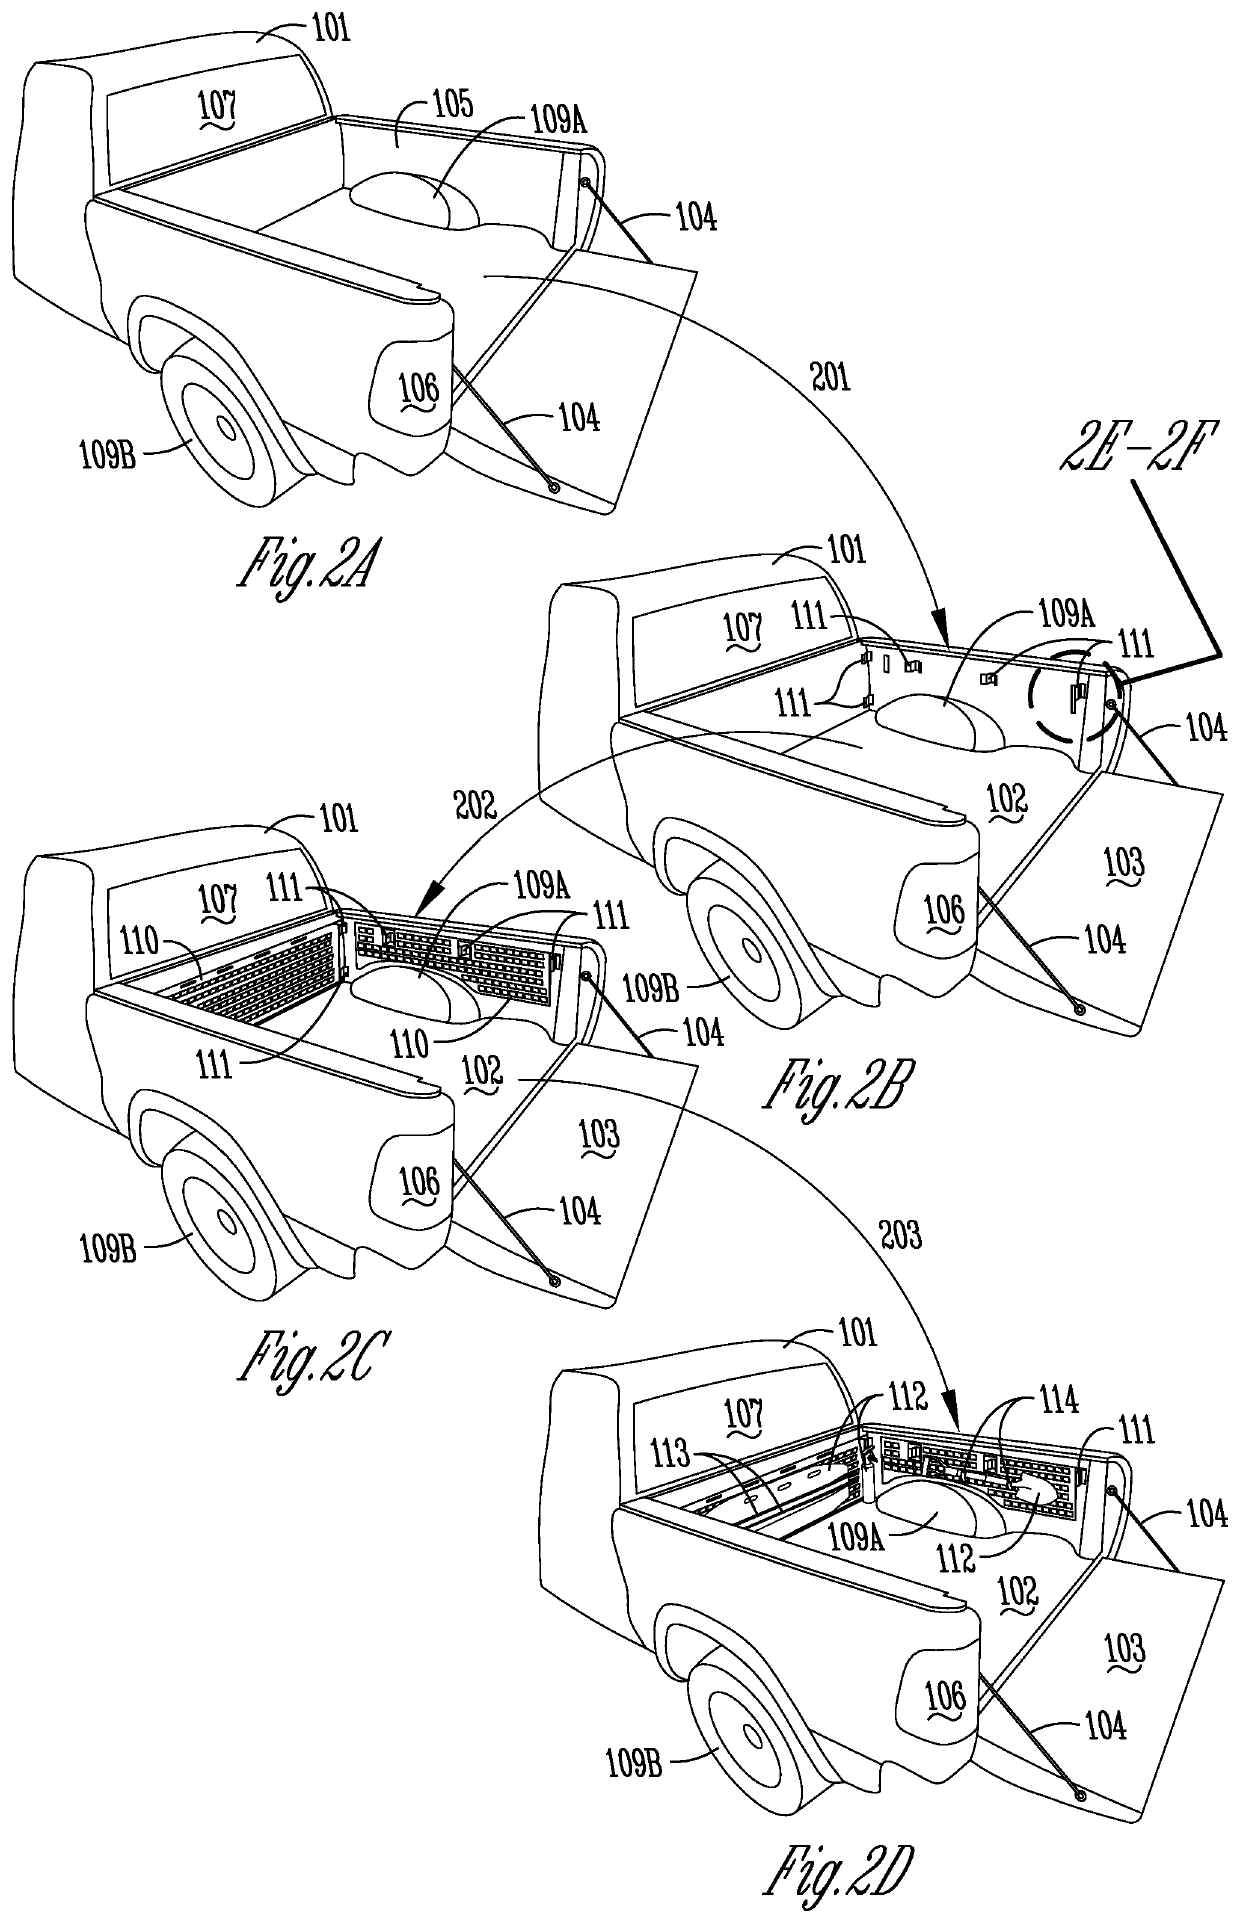 Brackets and methods for installing modular, lightweight load-carrying panels and racks on automobiles